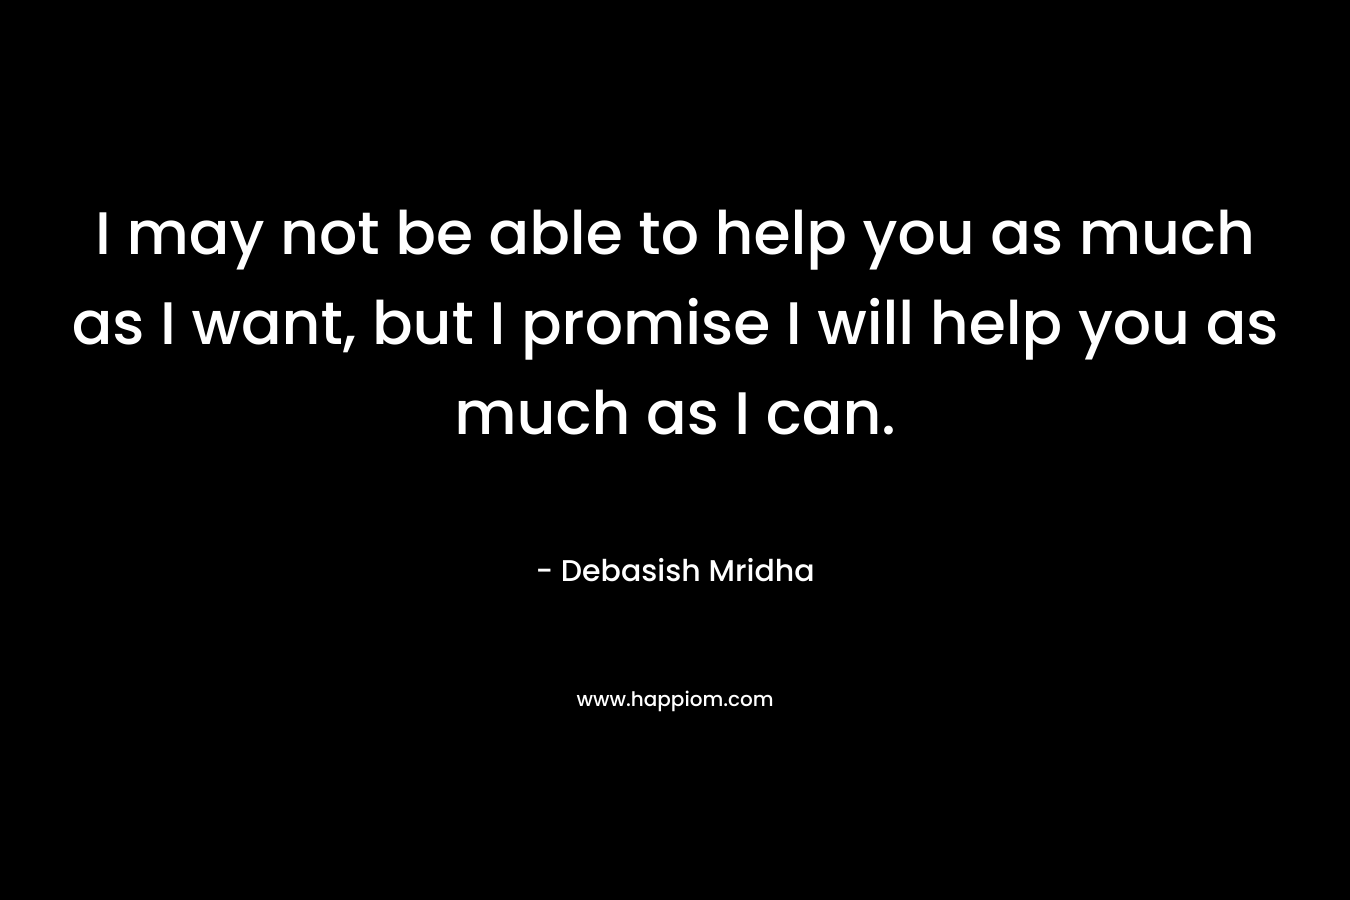 I may not be able to help you as much as I want, but I promise I will help you as much as I can.